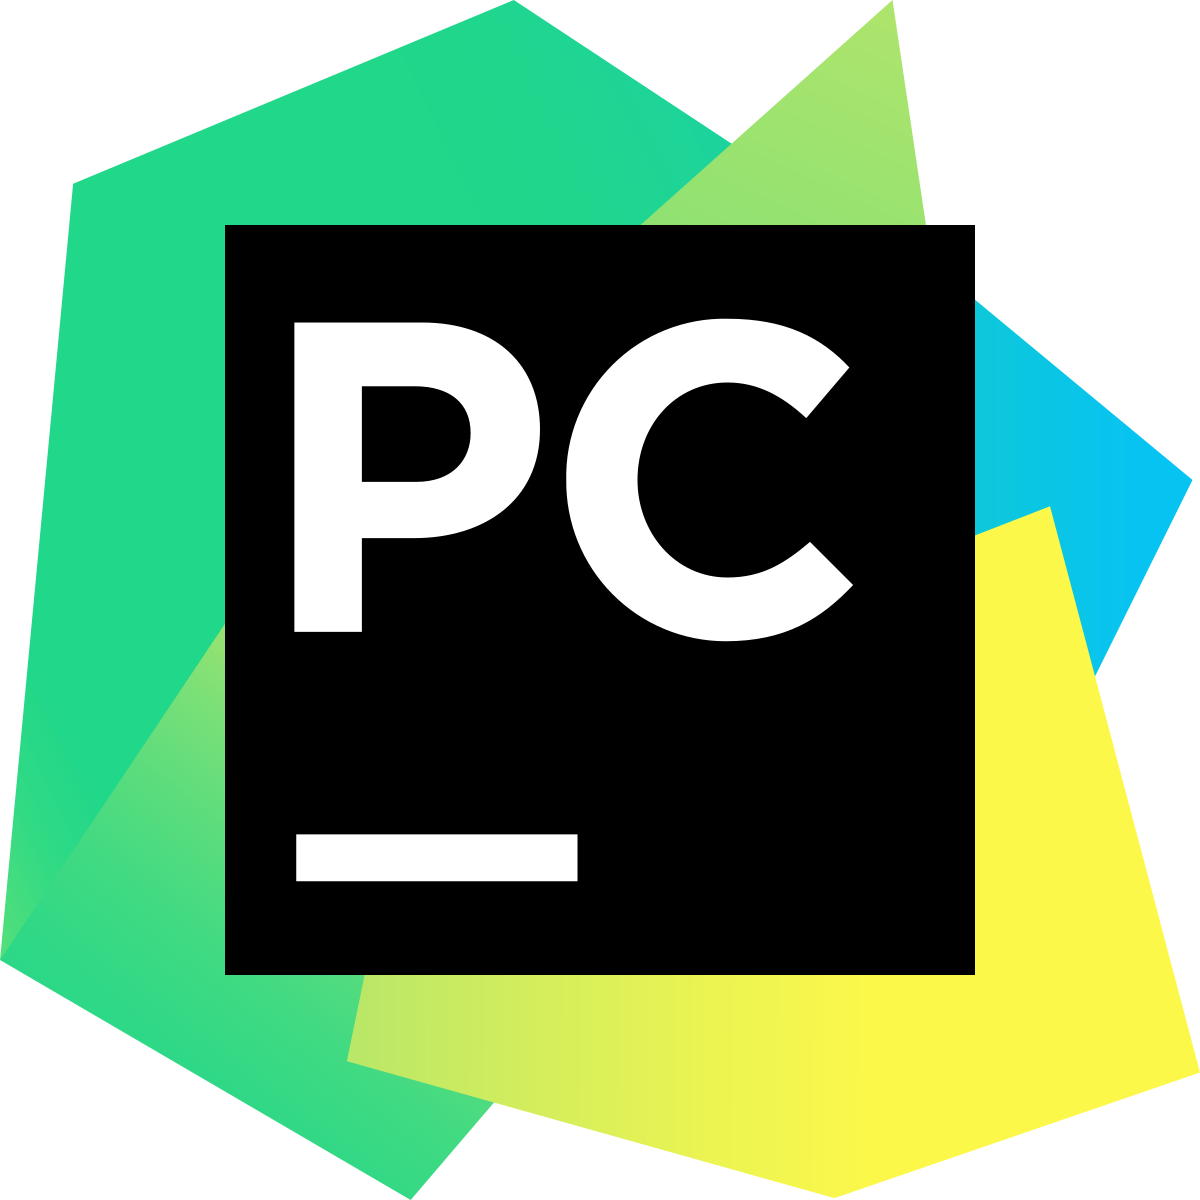 download pycharm for students